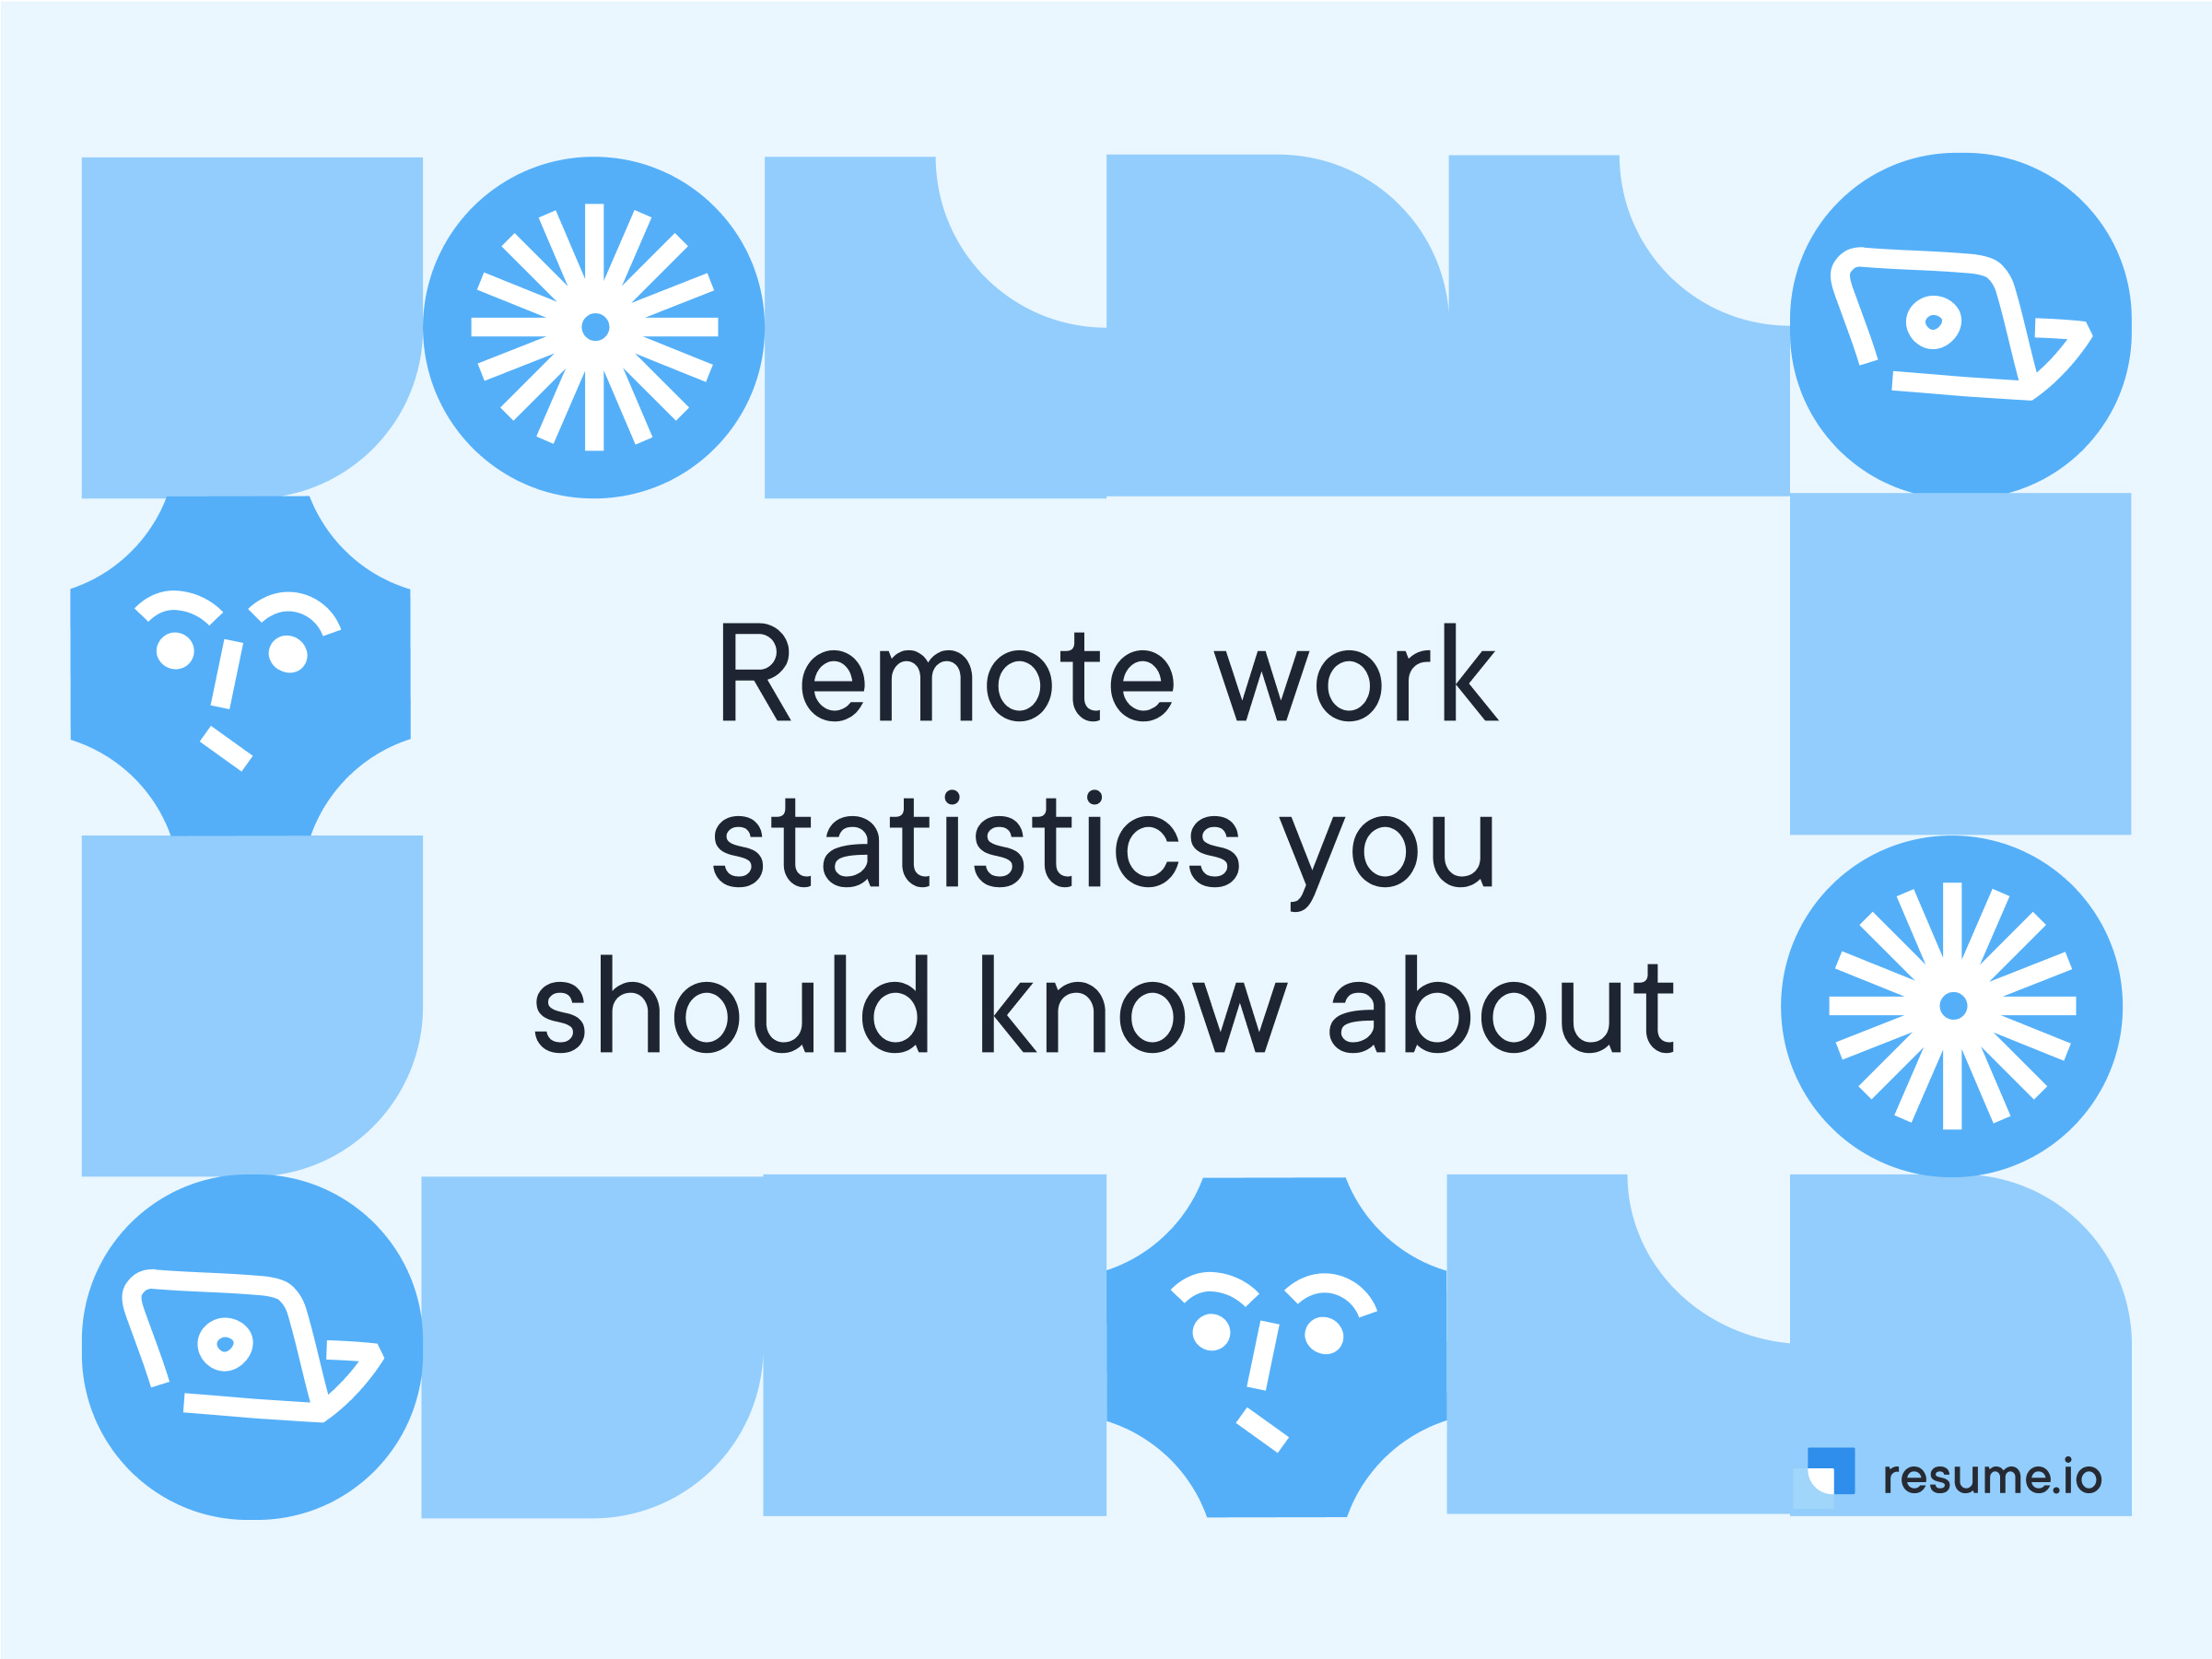 Remote work statistics you should know about